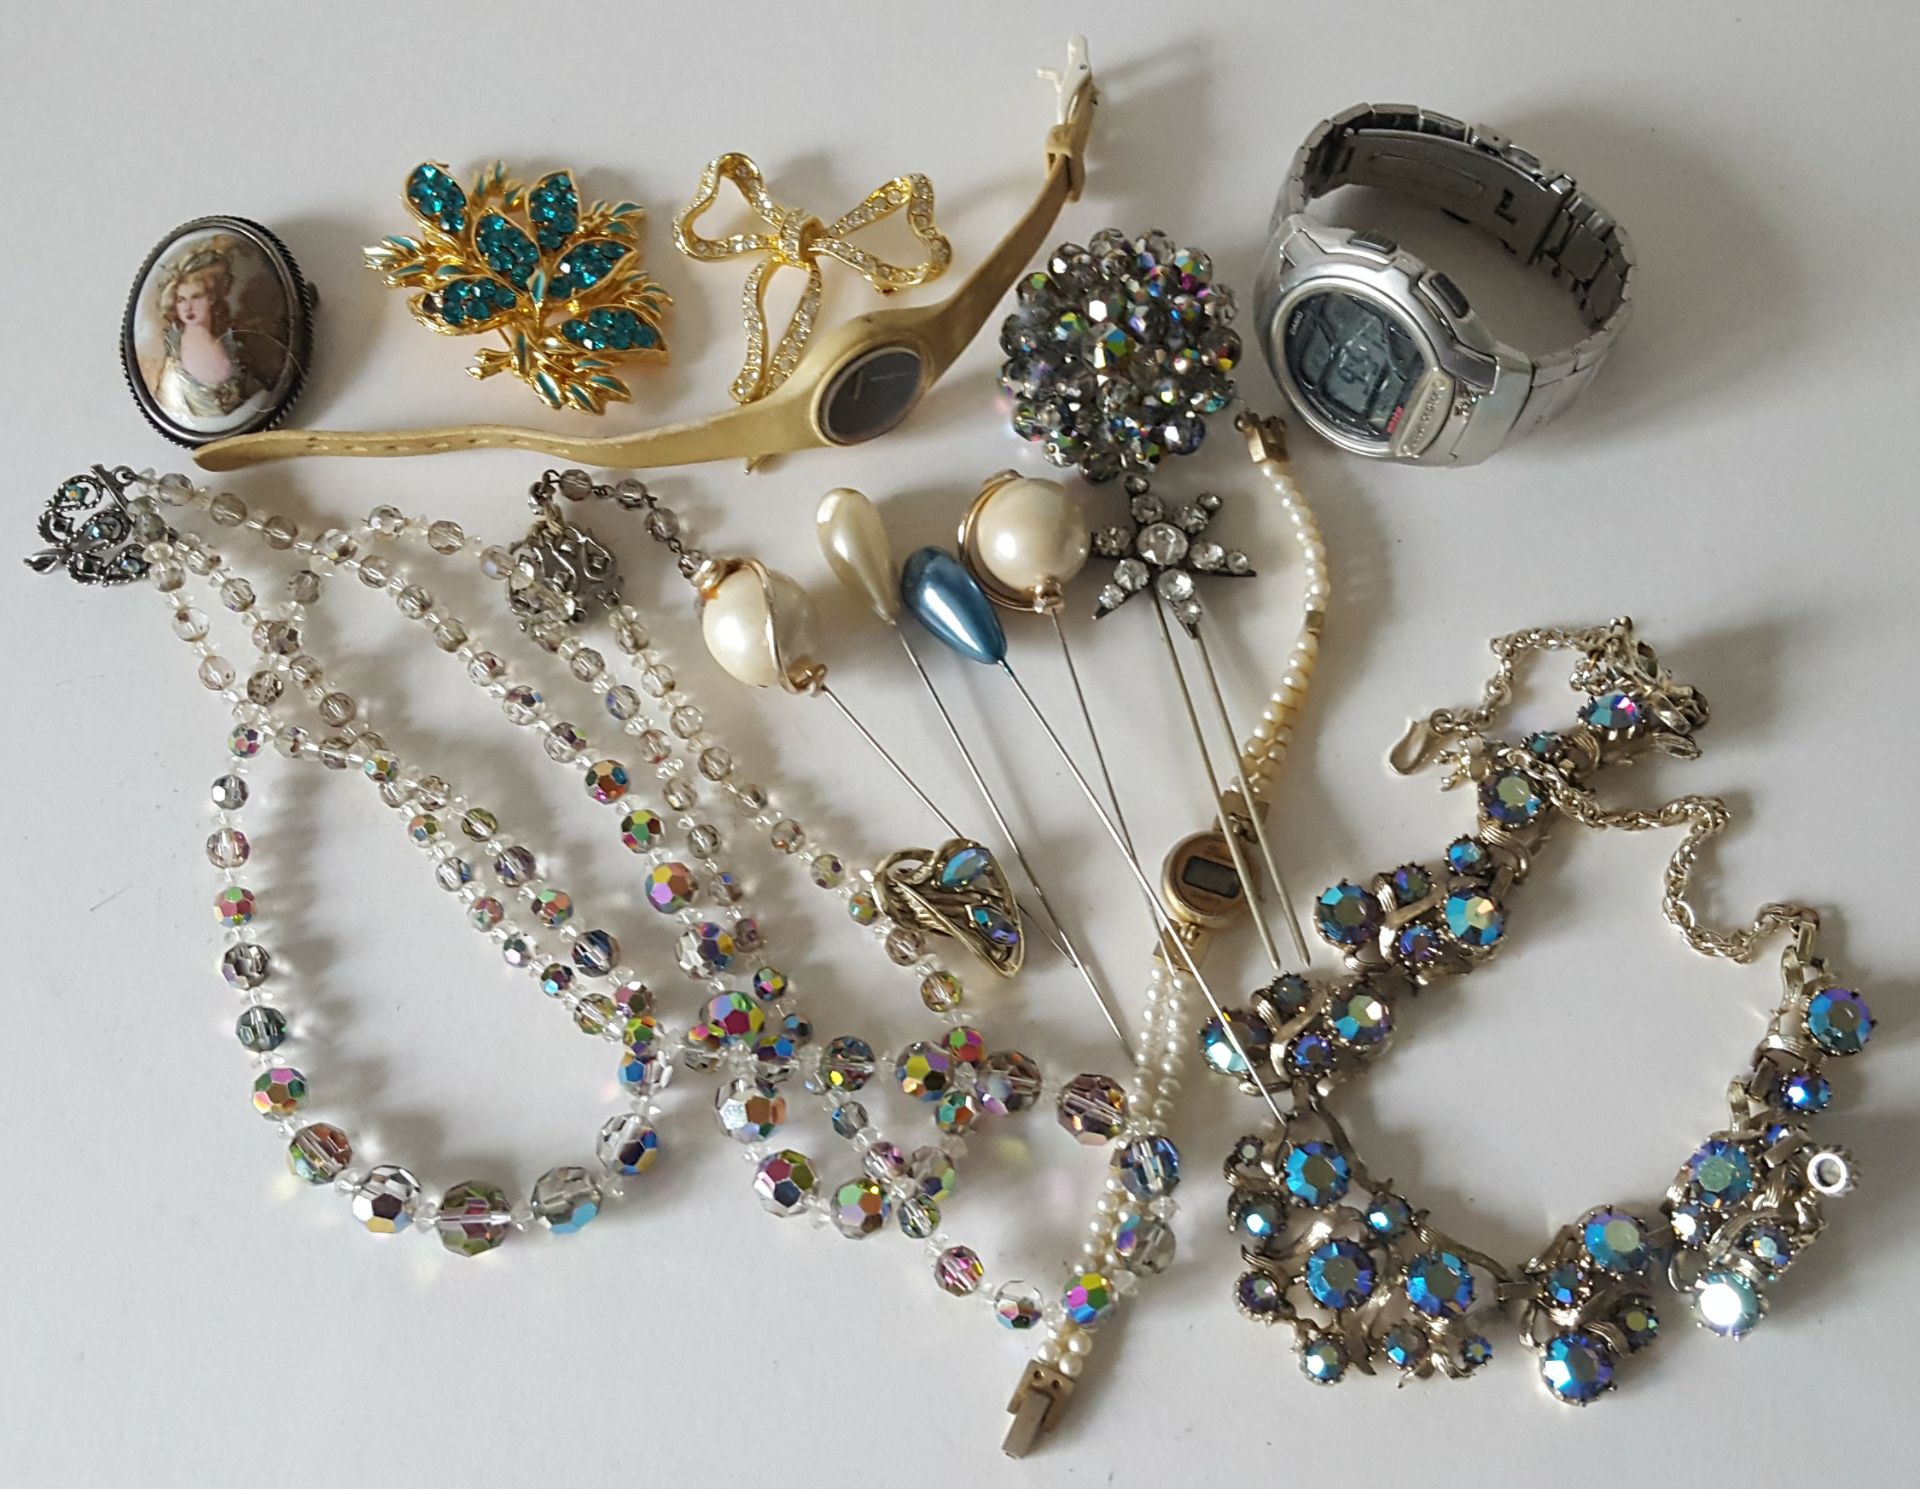 Vintage Retro Kitsch Parcel of Costume Jewellery Includes Casio Watch Hat Pins Necklaces